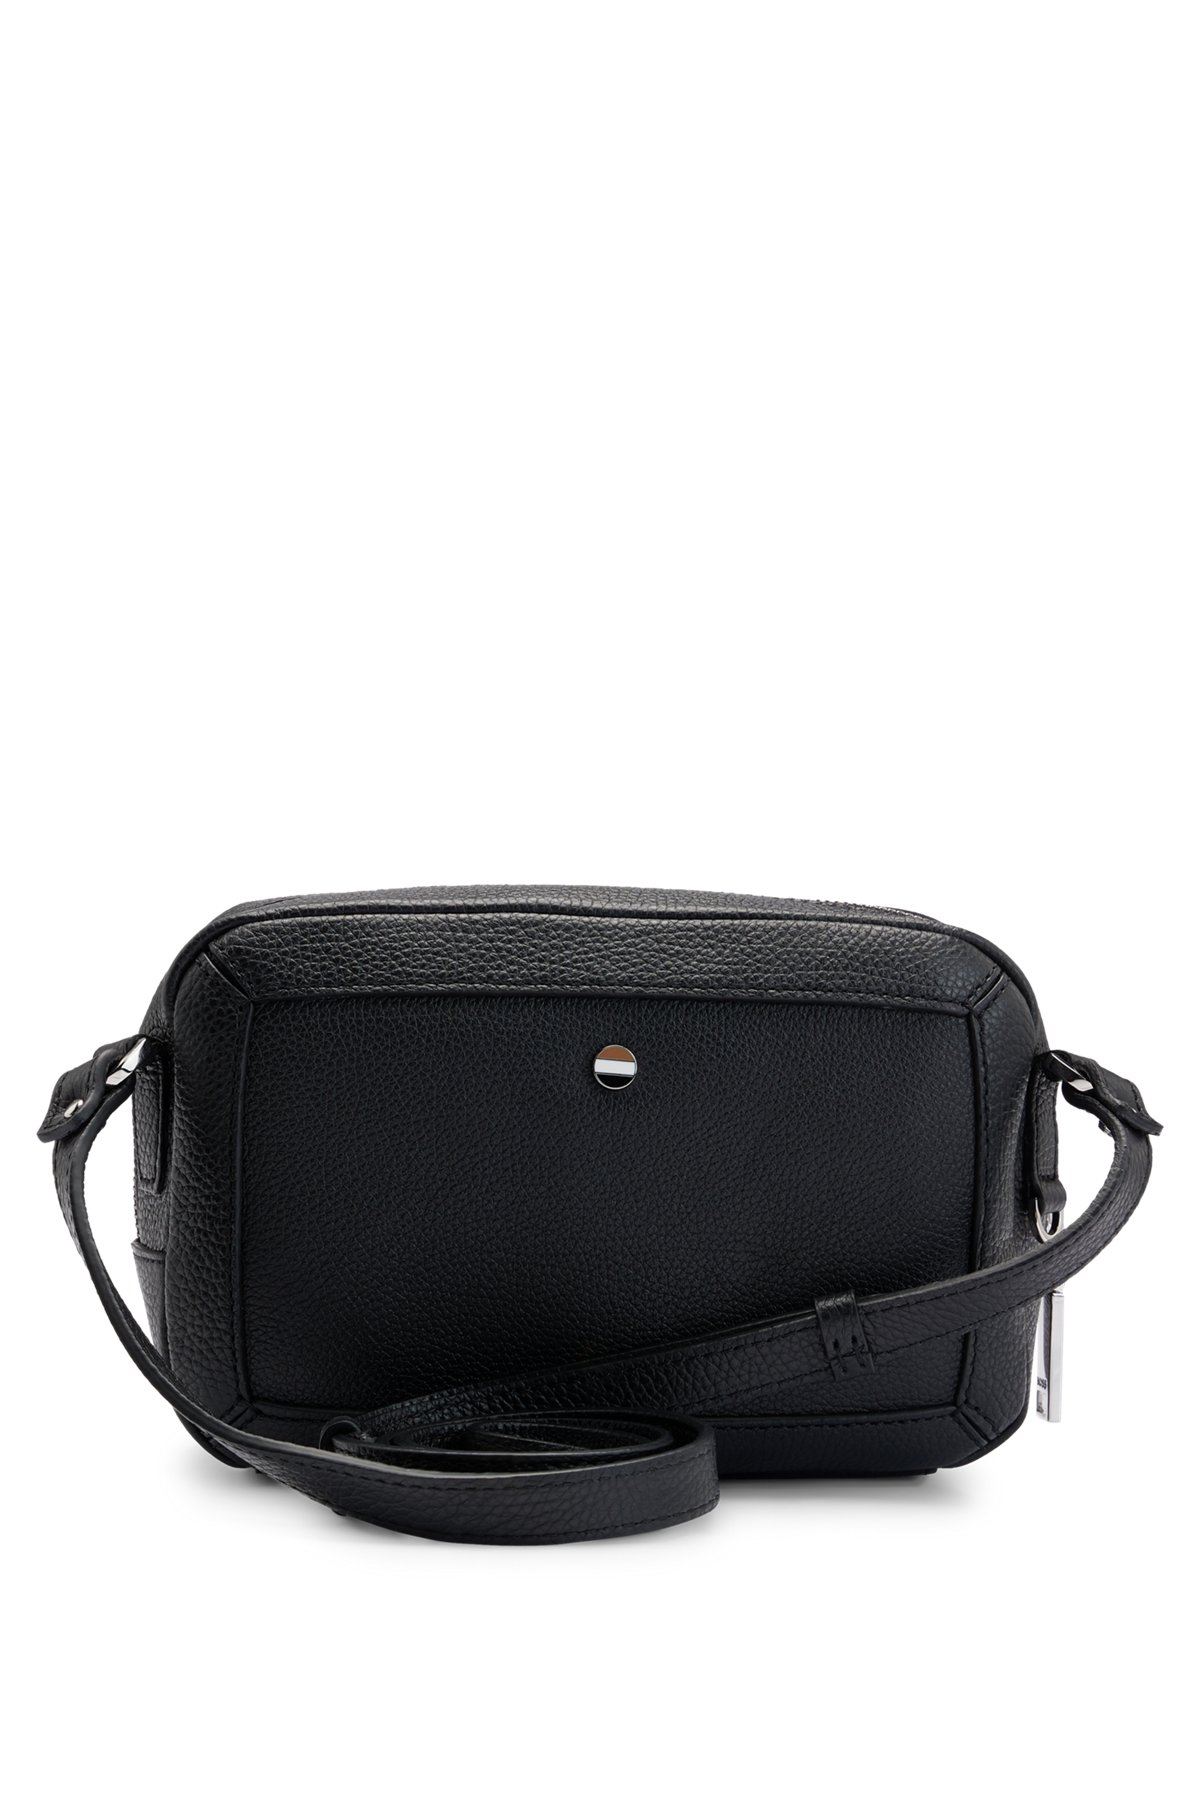 Grained-leather crossbody bag with branded hardware, Black